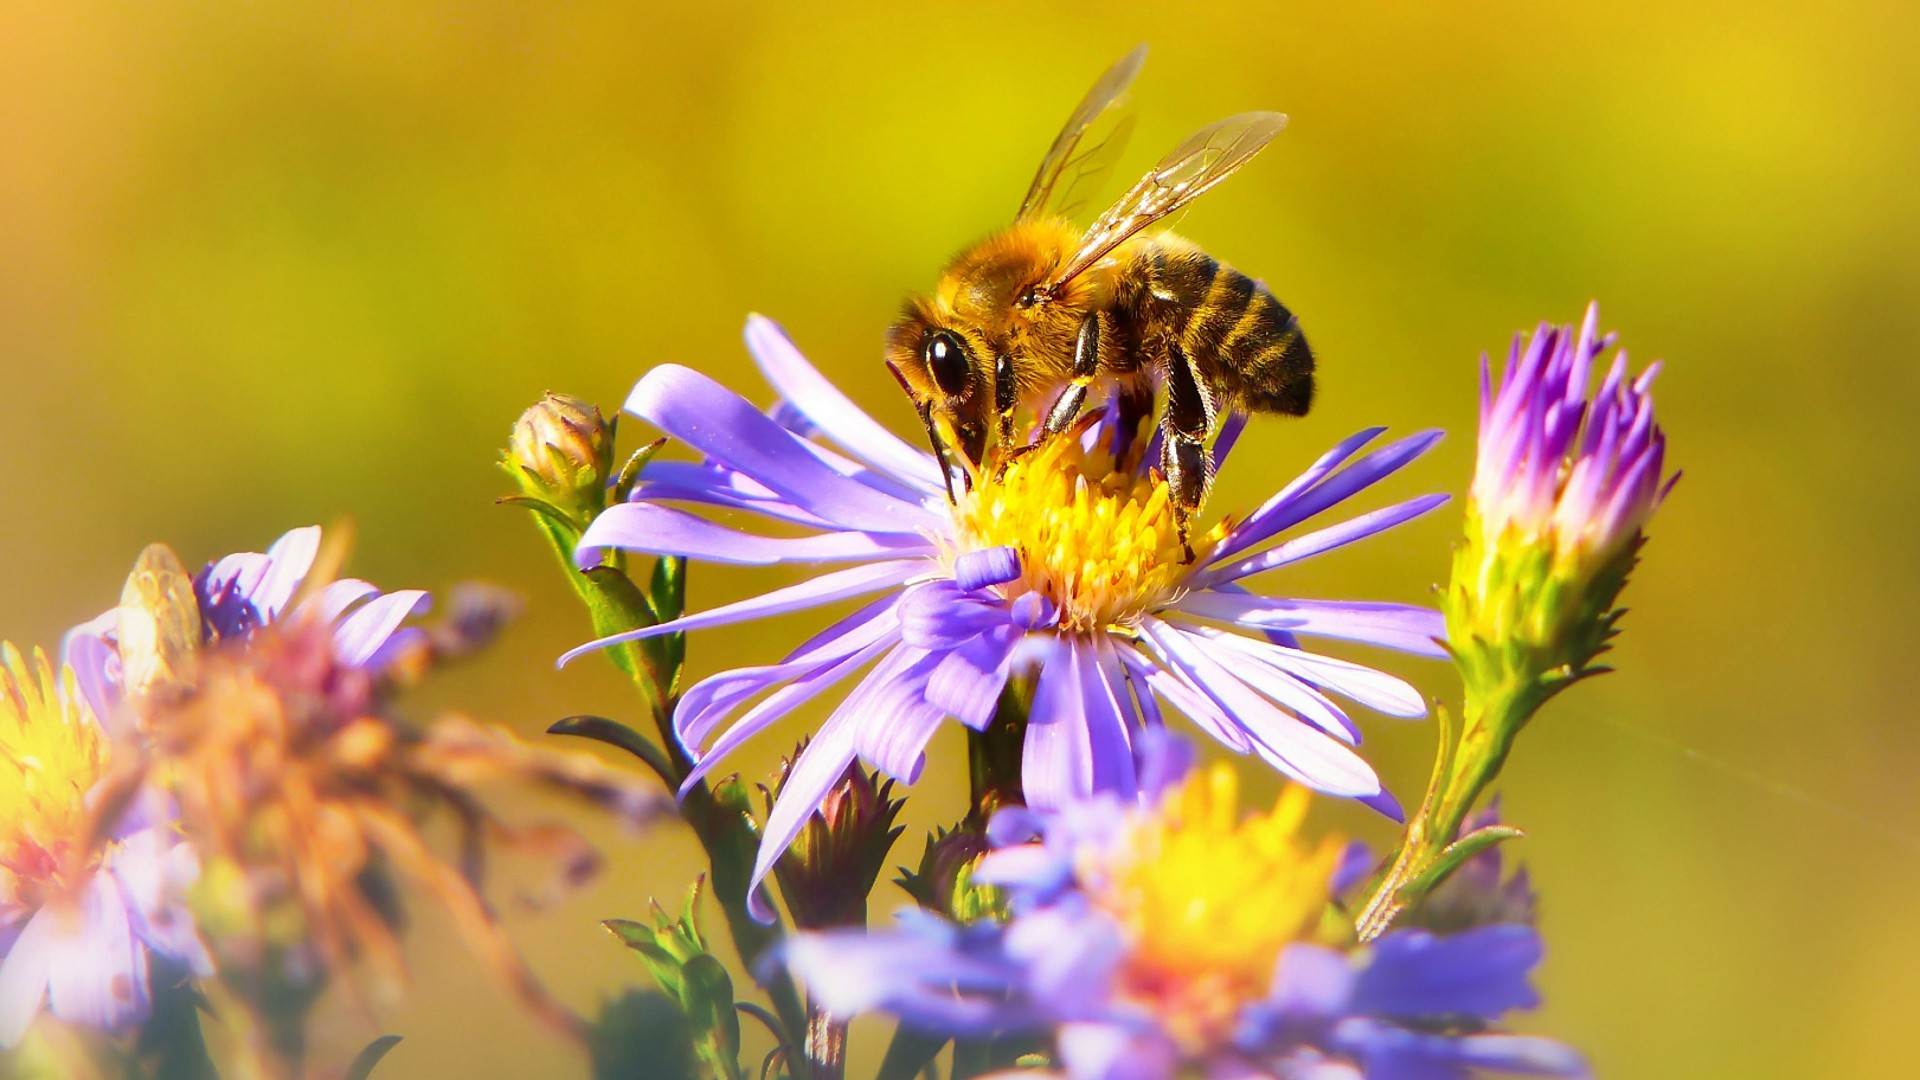 A bee sitting on a purple and yellow flower, with a blurry green background